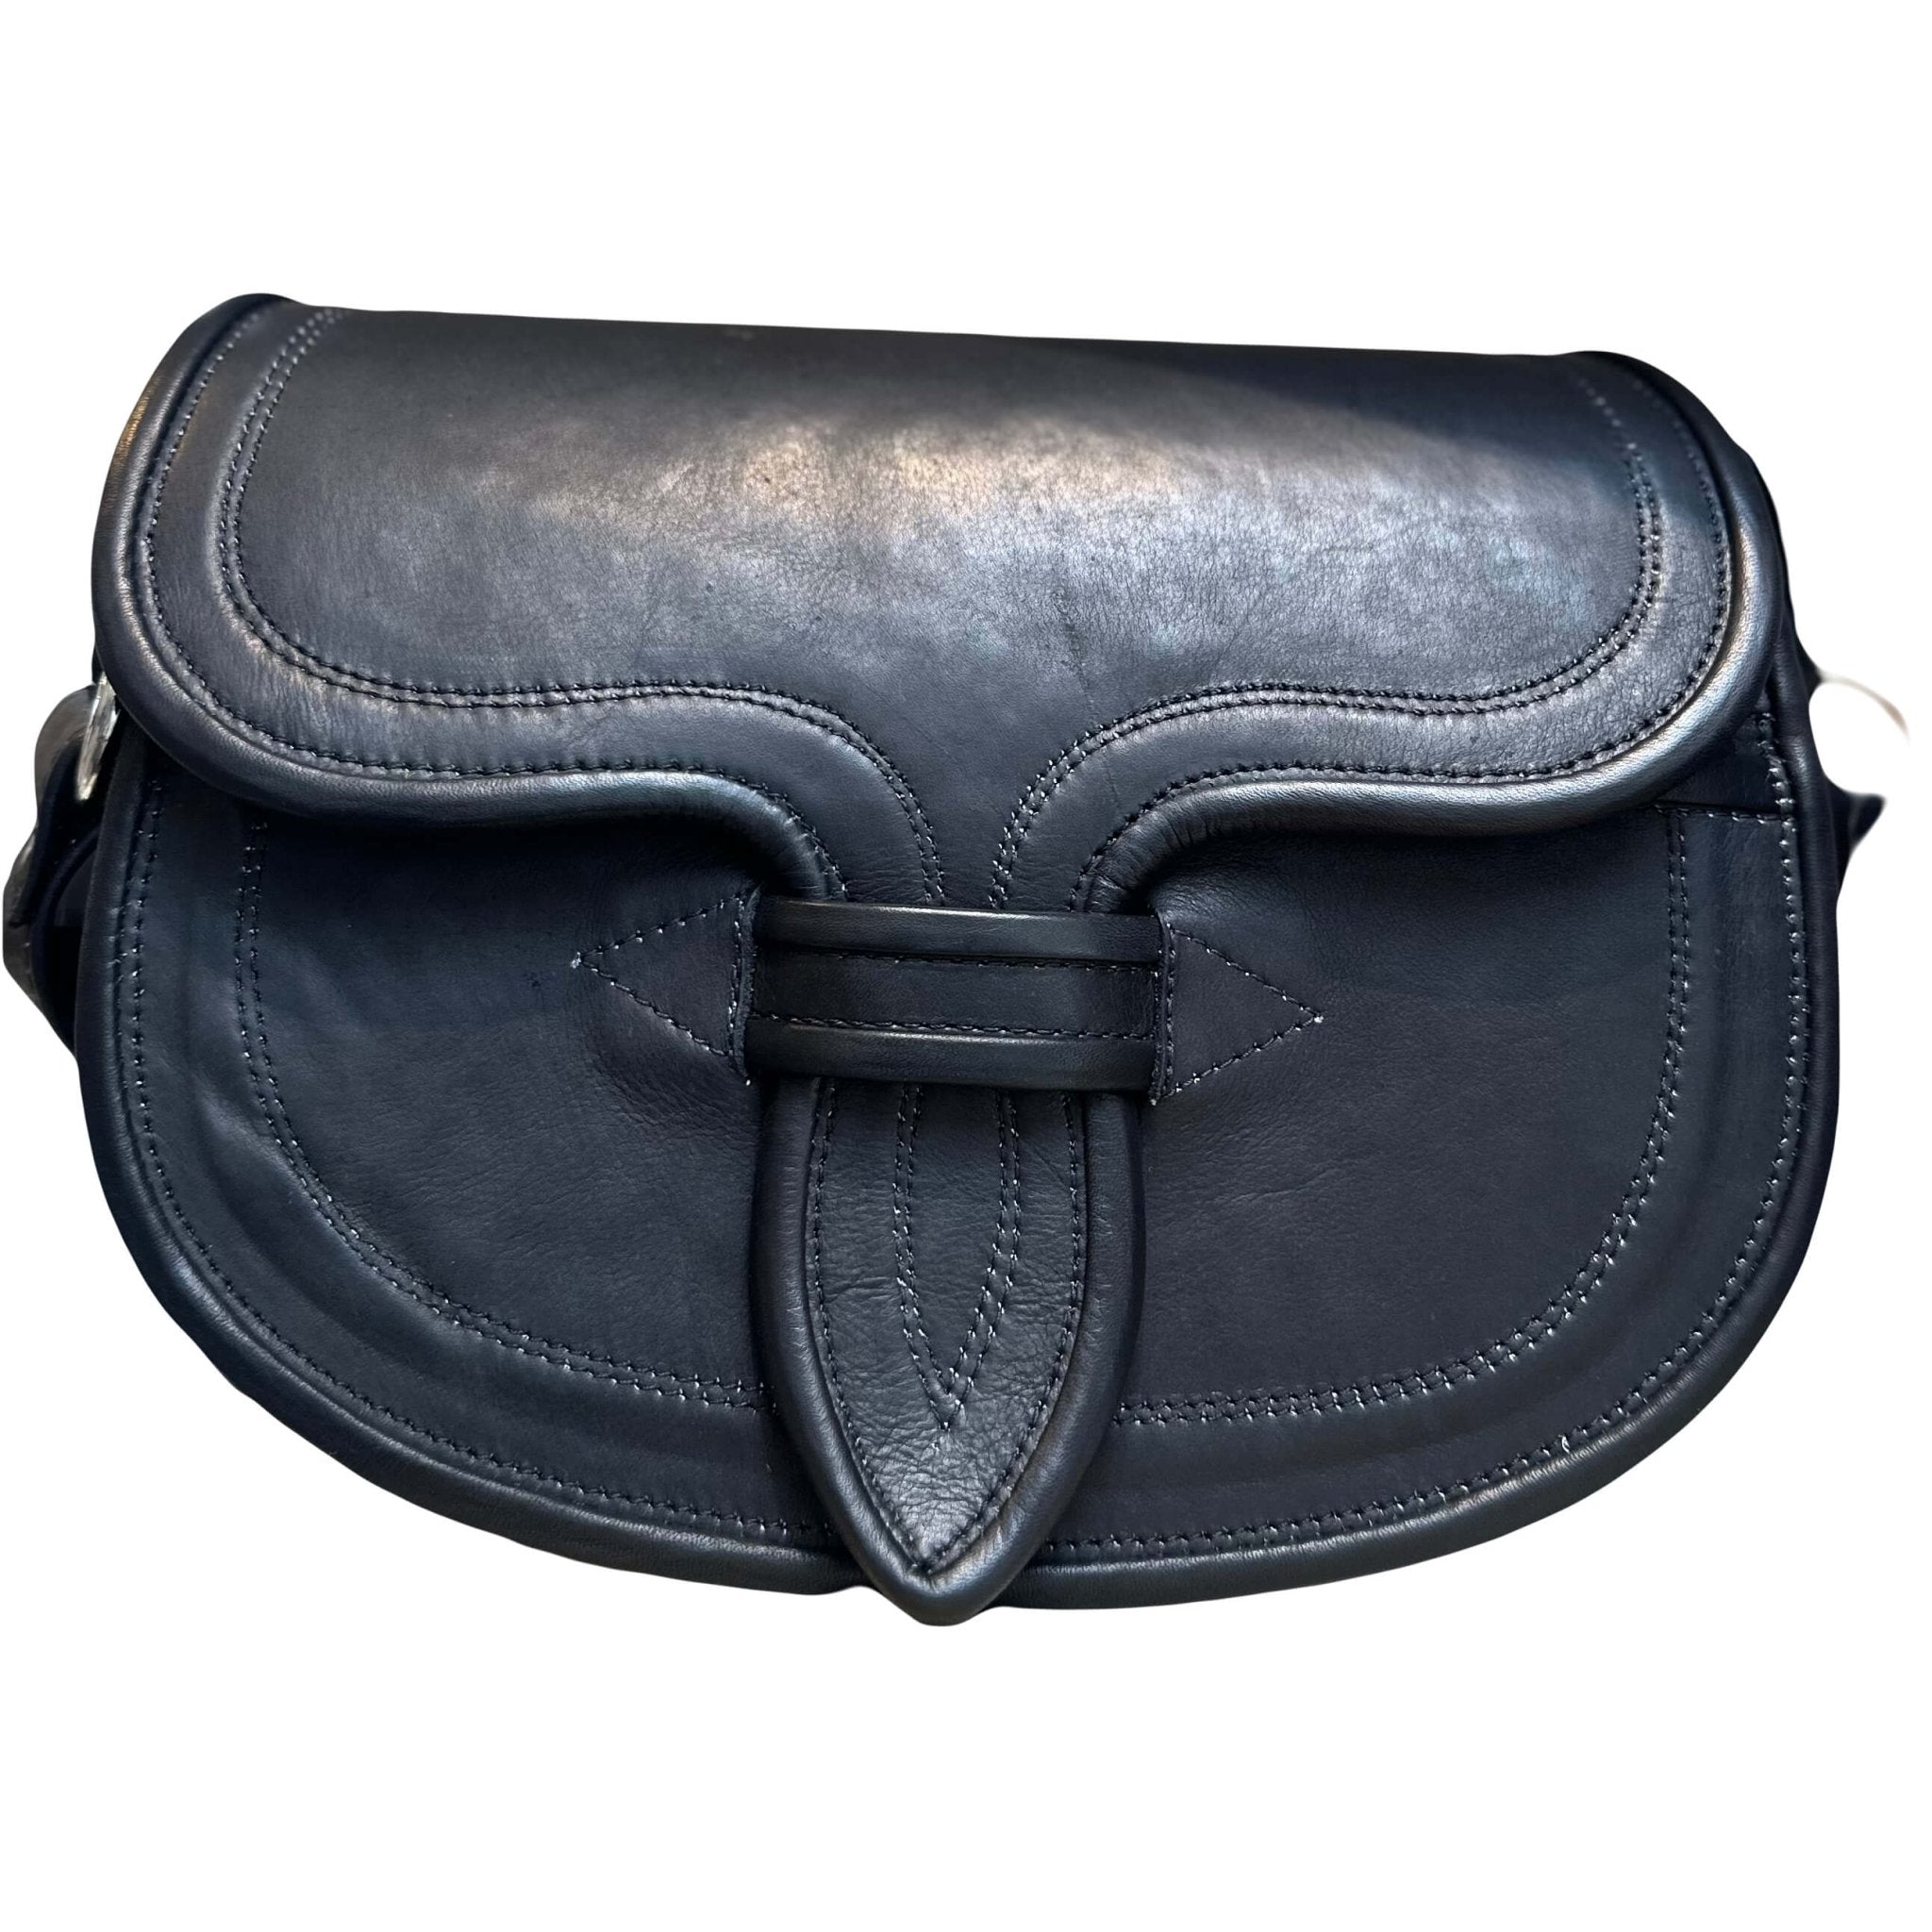 Oversized carriel crossbody bag in black. It is a semi round bag with intricate stitching. It is displayed over a white background.